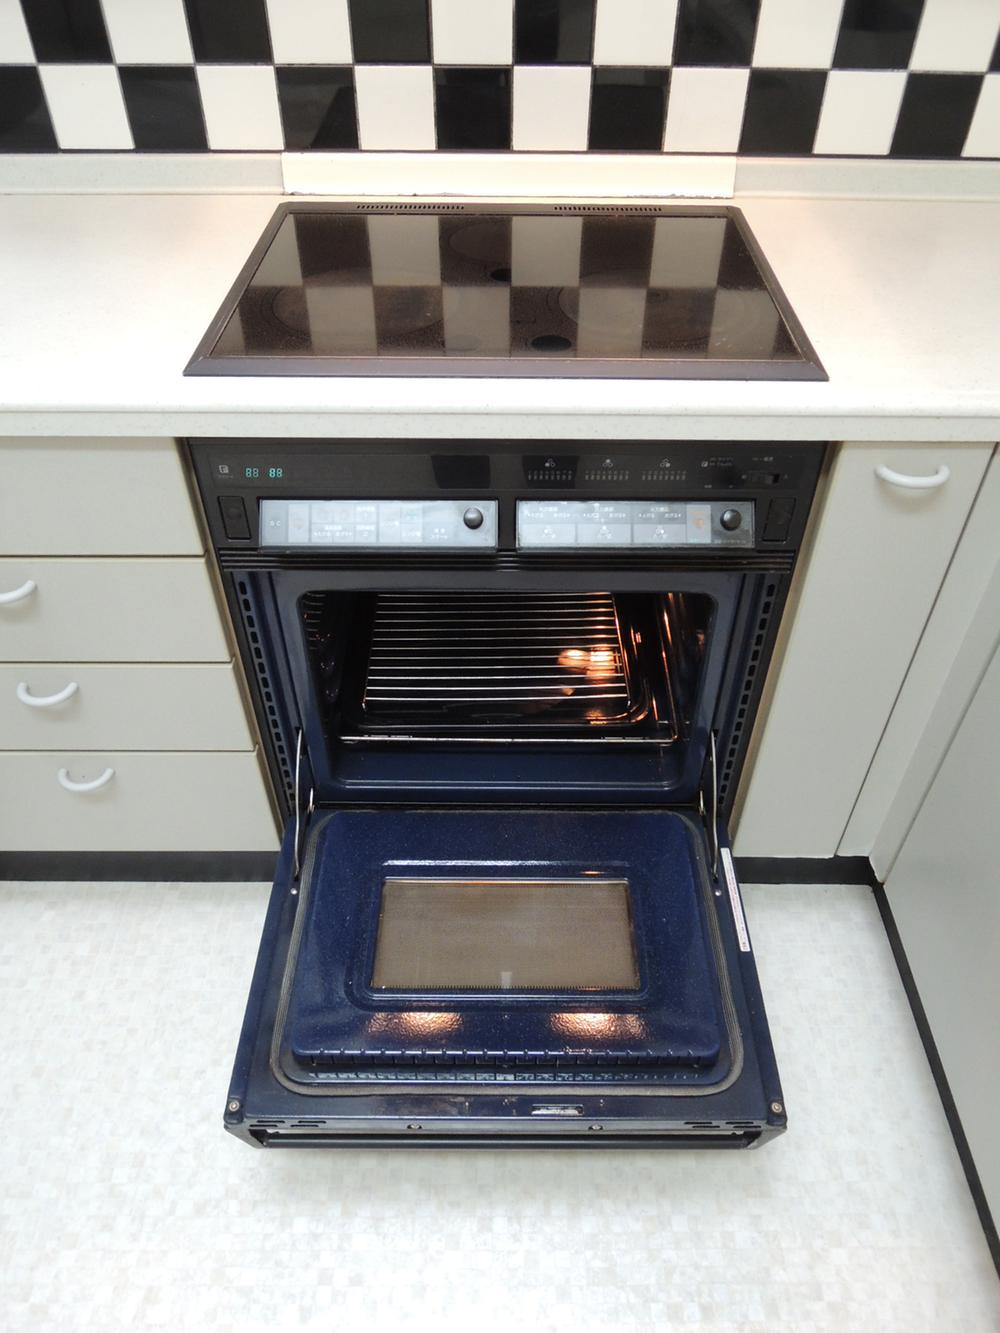 Kitchen. IH cooking heater and oven